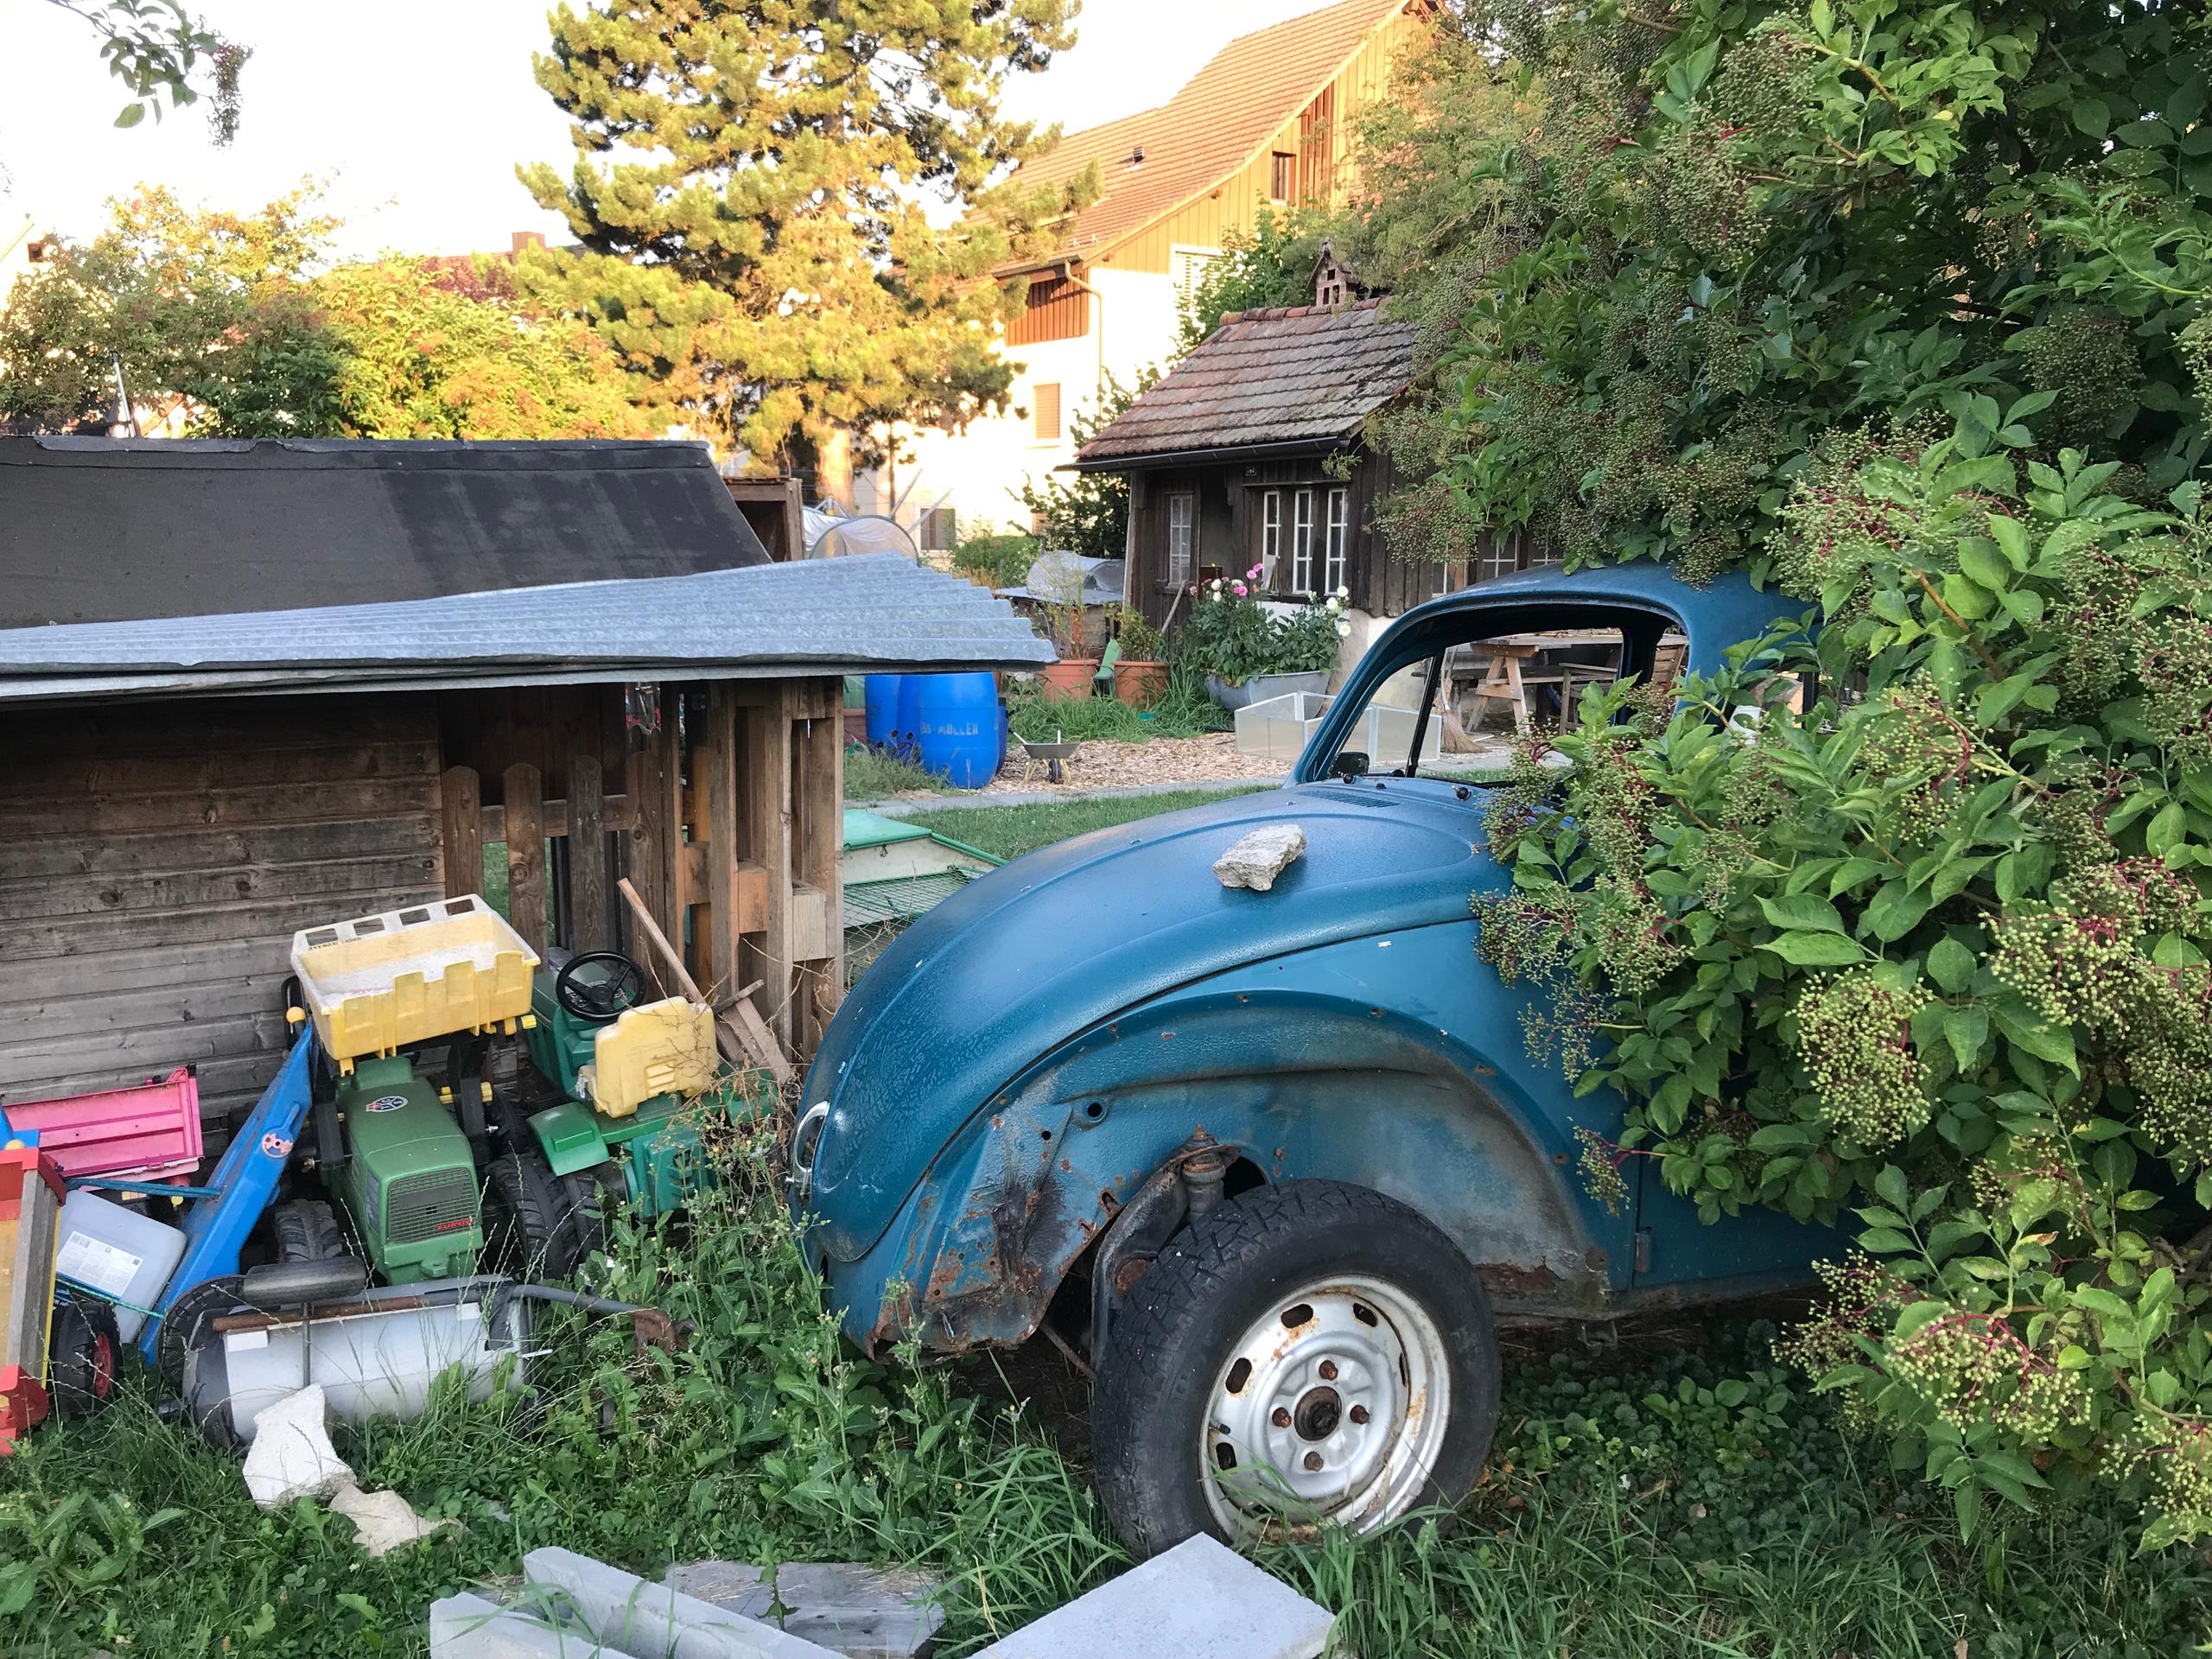 An old VW beetle in the back garden of a home in the village